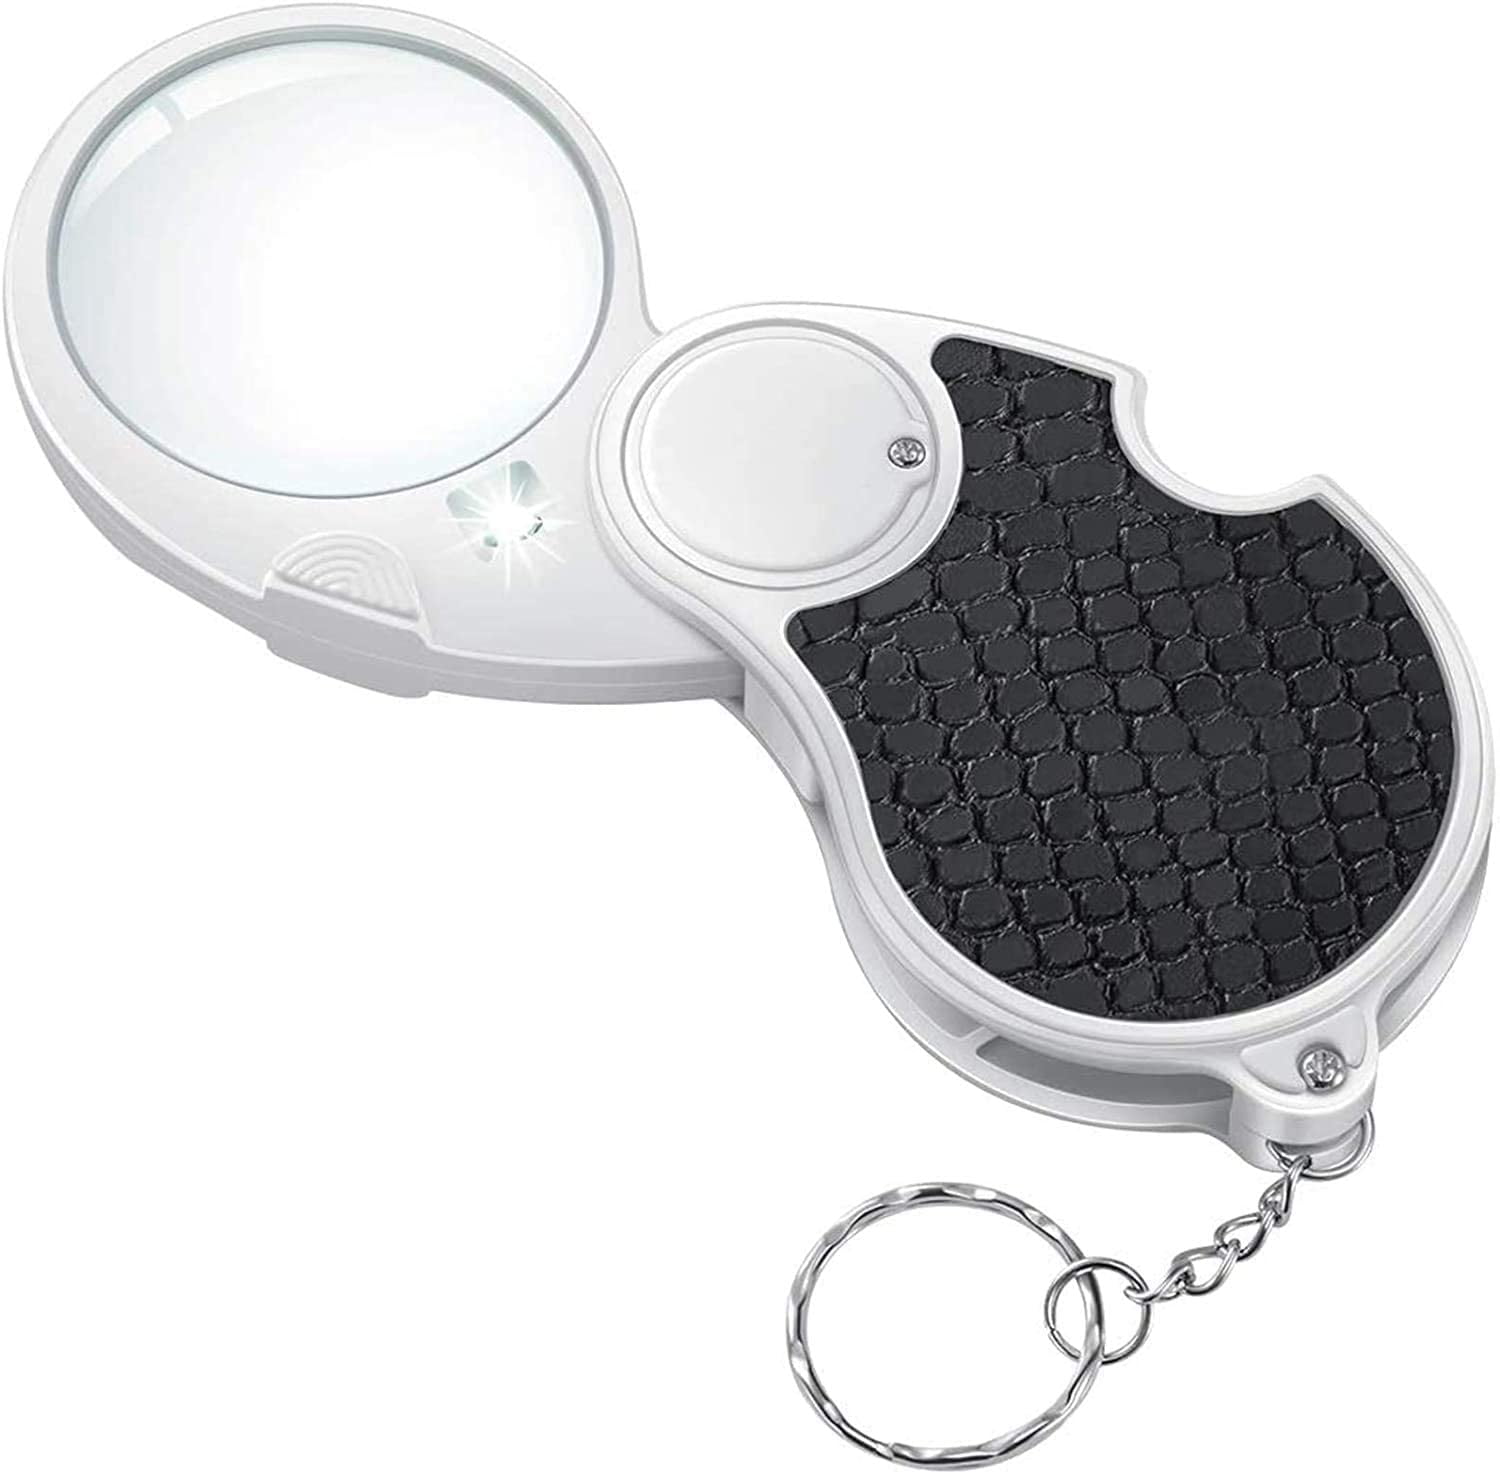 TSV Handheld Lighted Magnifier, 25X 10X Luminated Magnifier, 9 LED Lighted  Magnifying Glass for Reading Books, Newspapers, Magazines, Maps